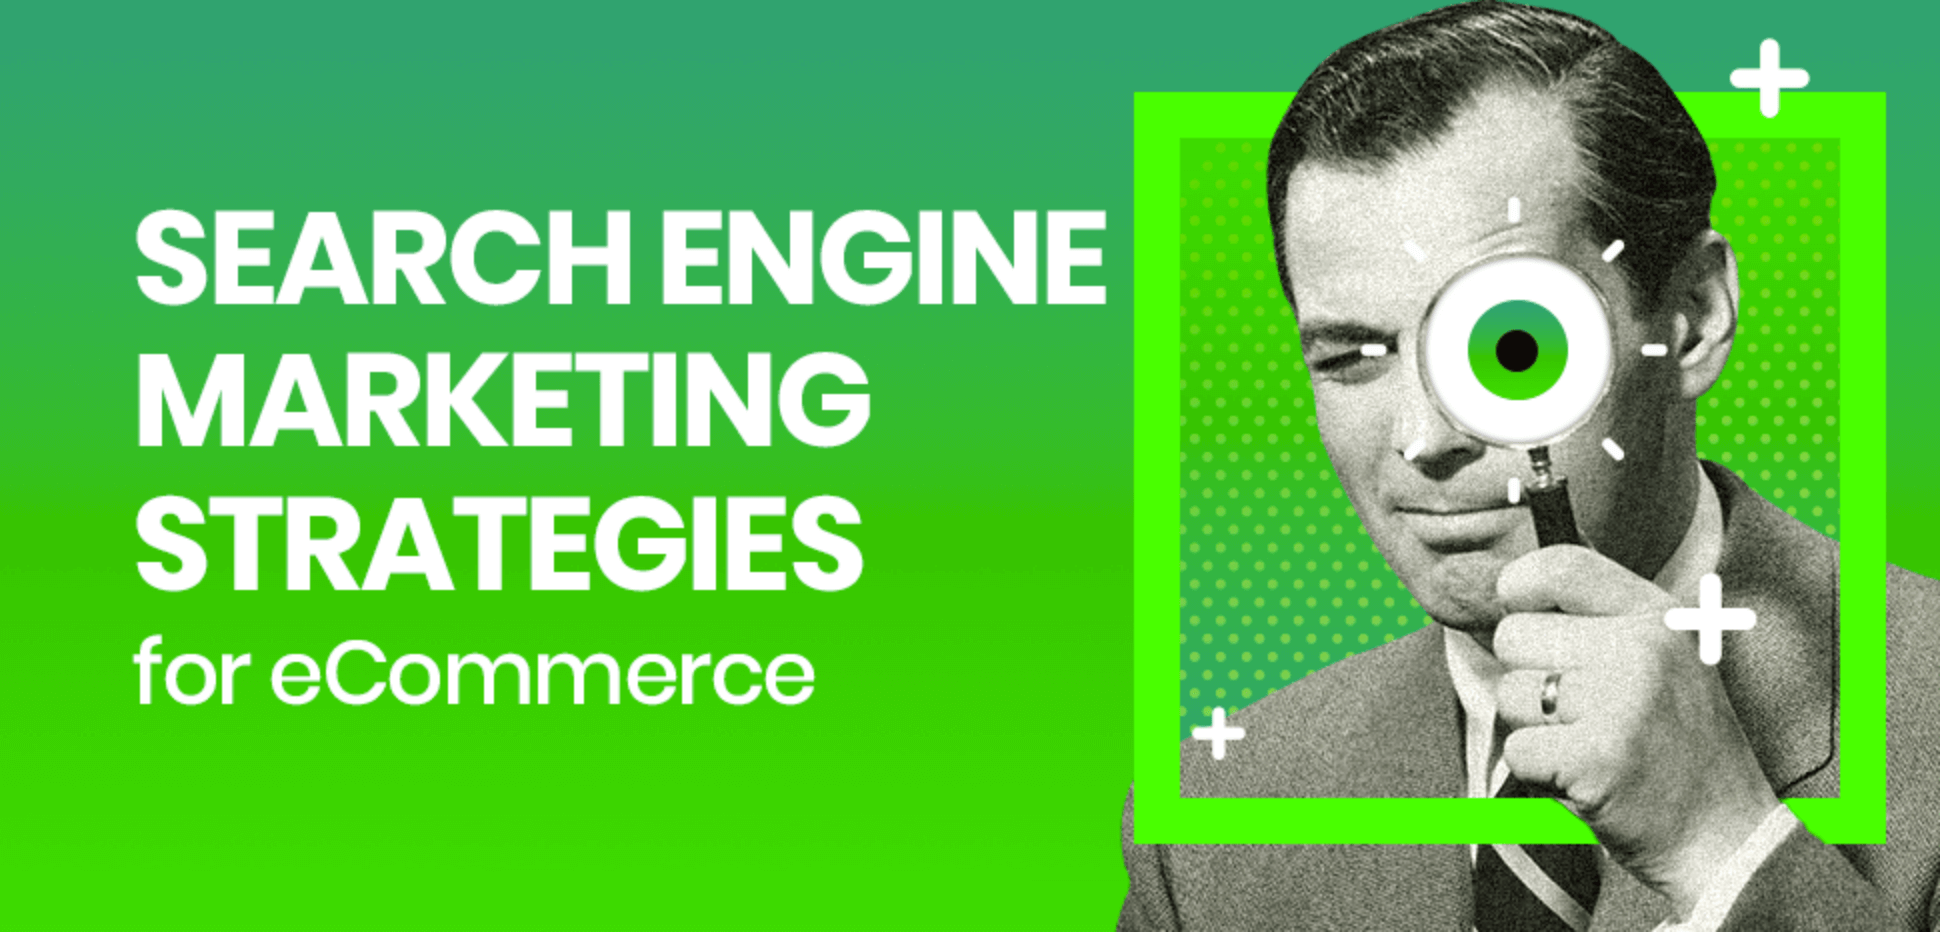 Search Engine Marketing Strategies for eCommerce